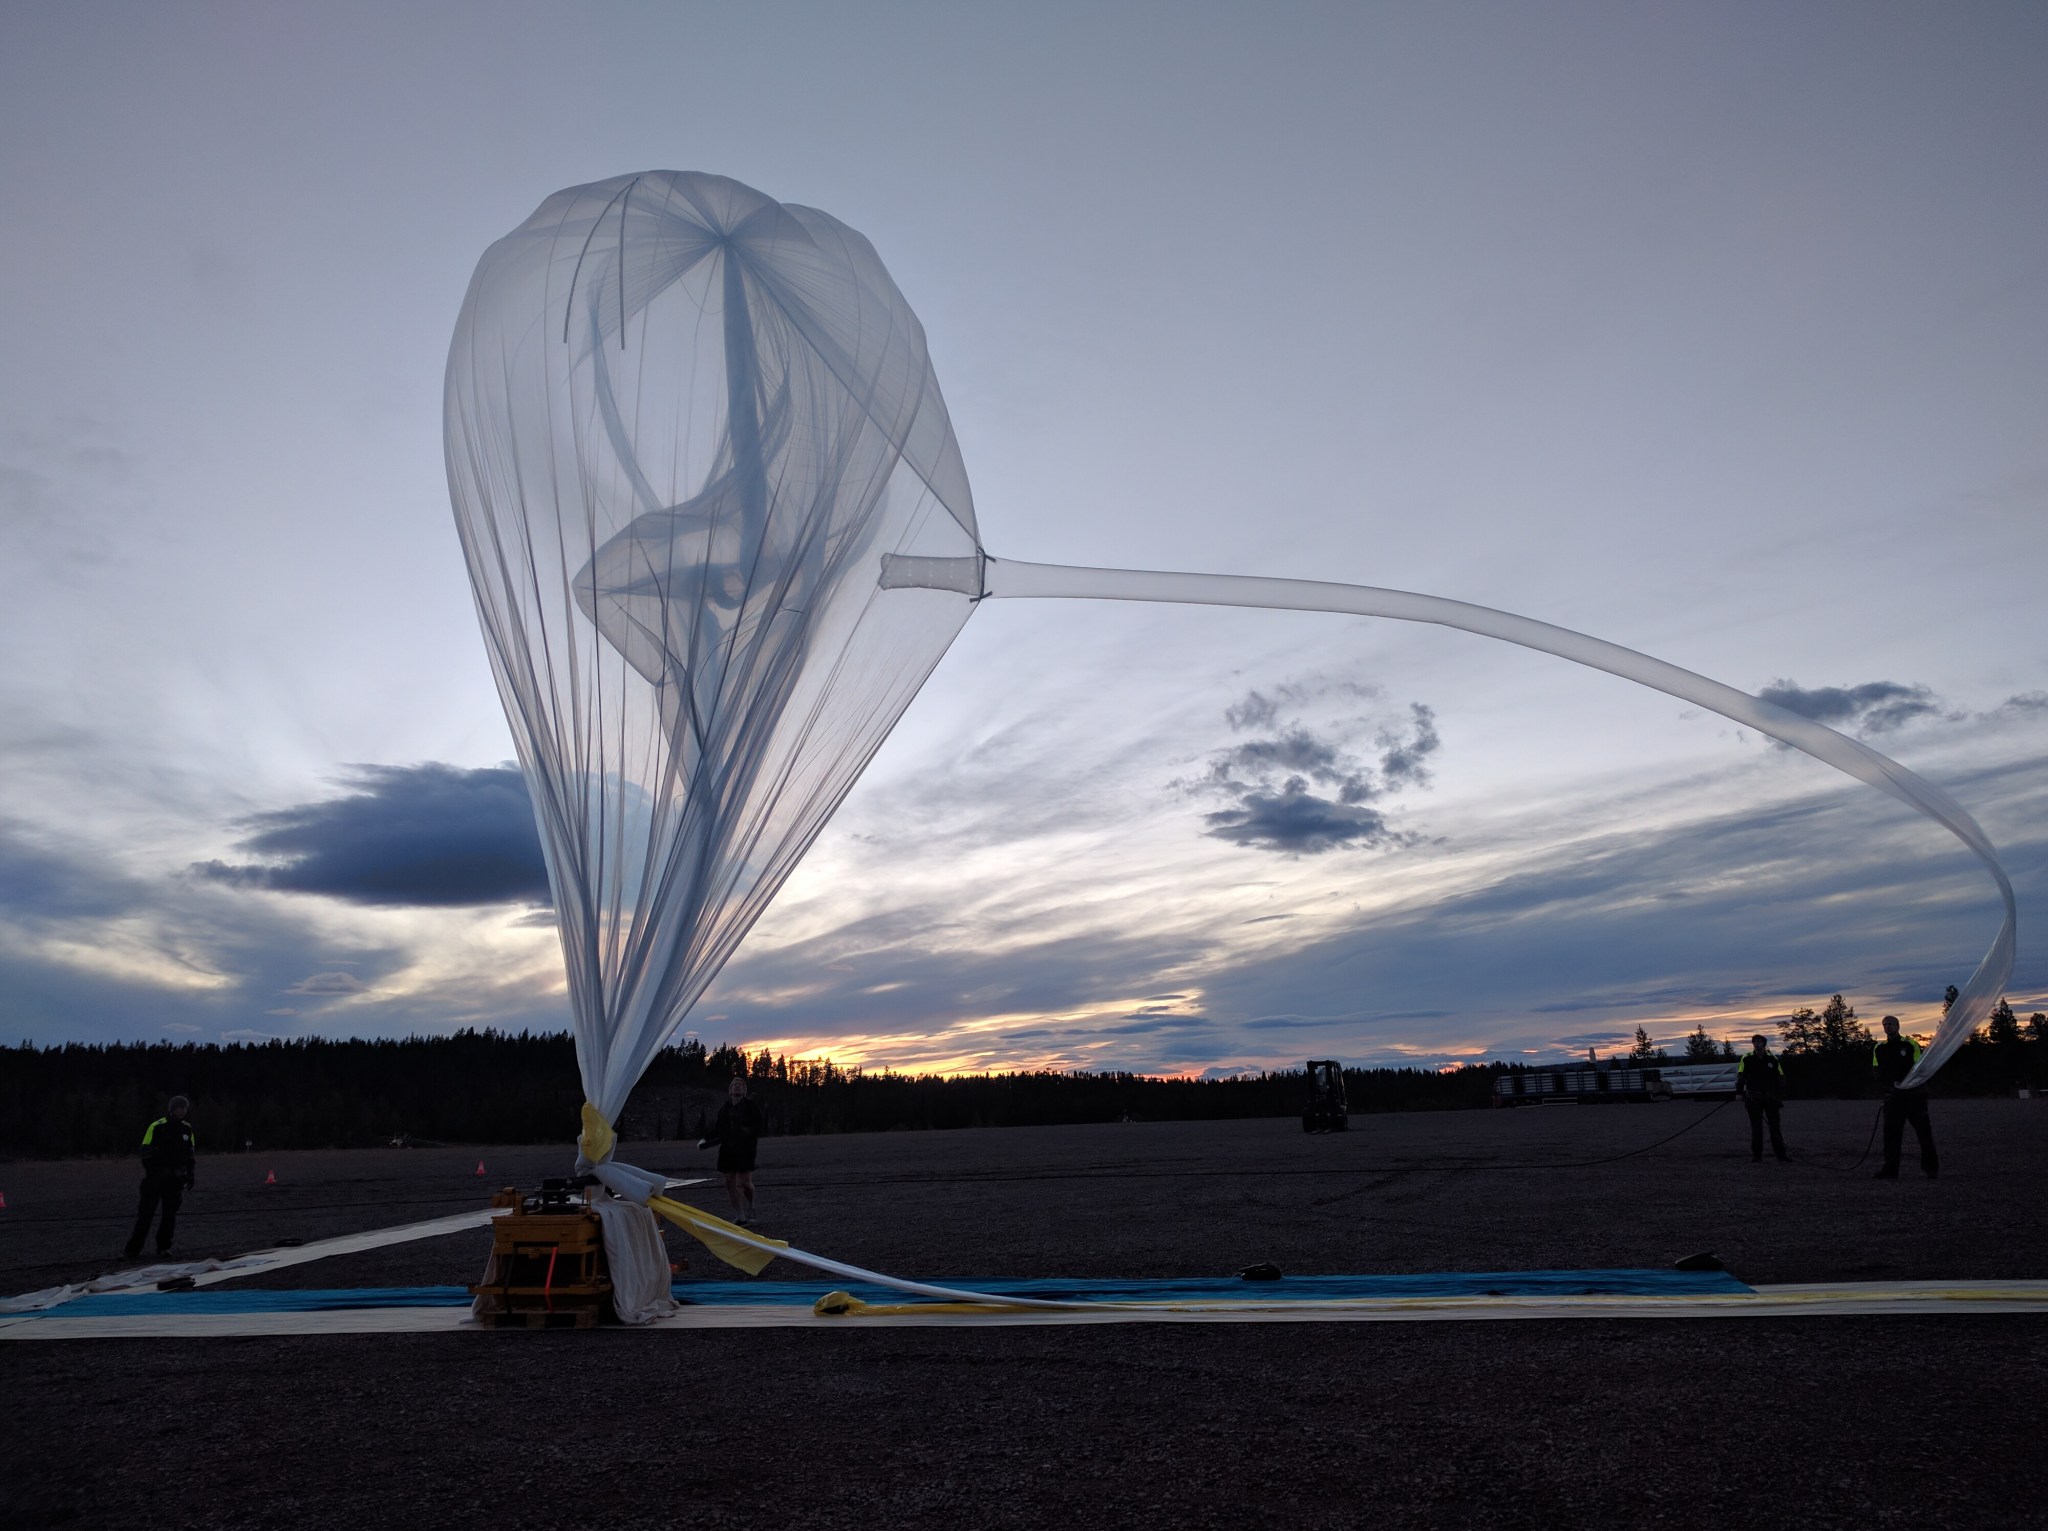 BARREL scientific balloon being inflated